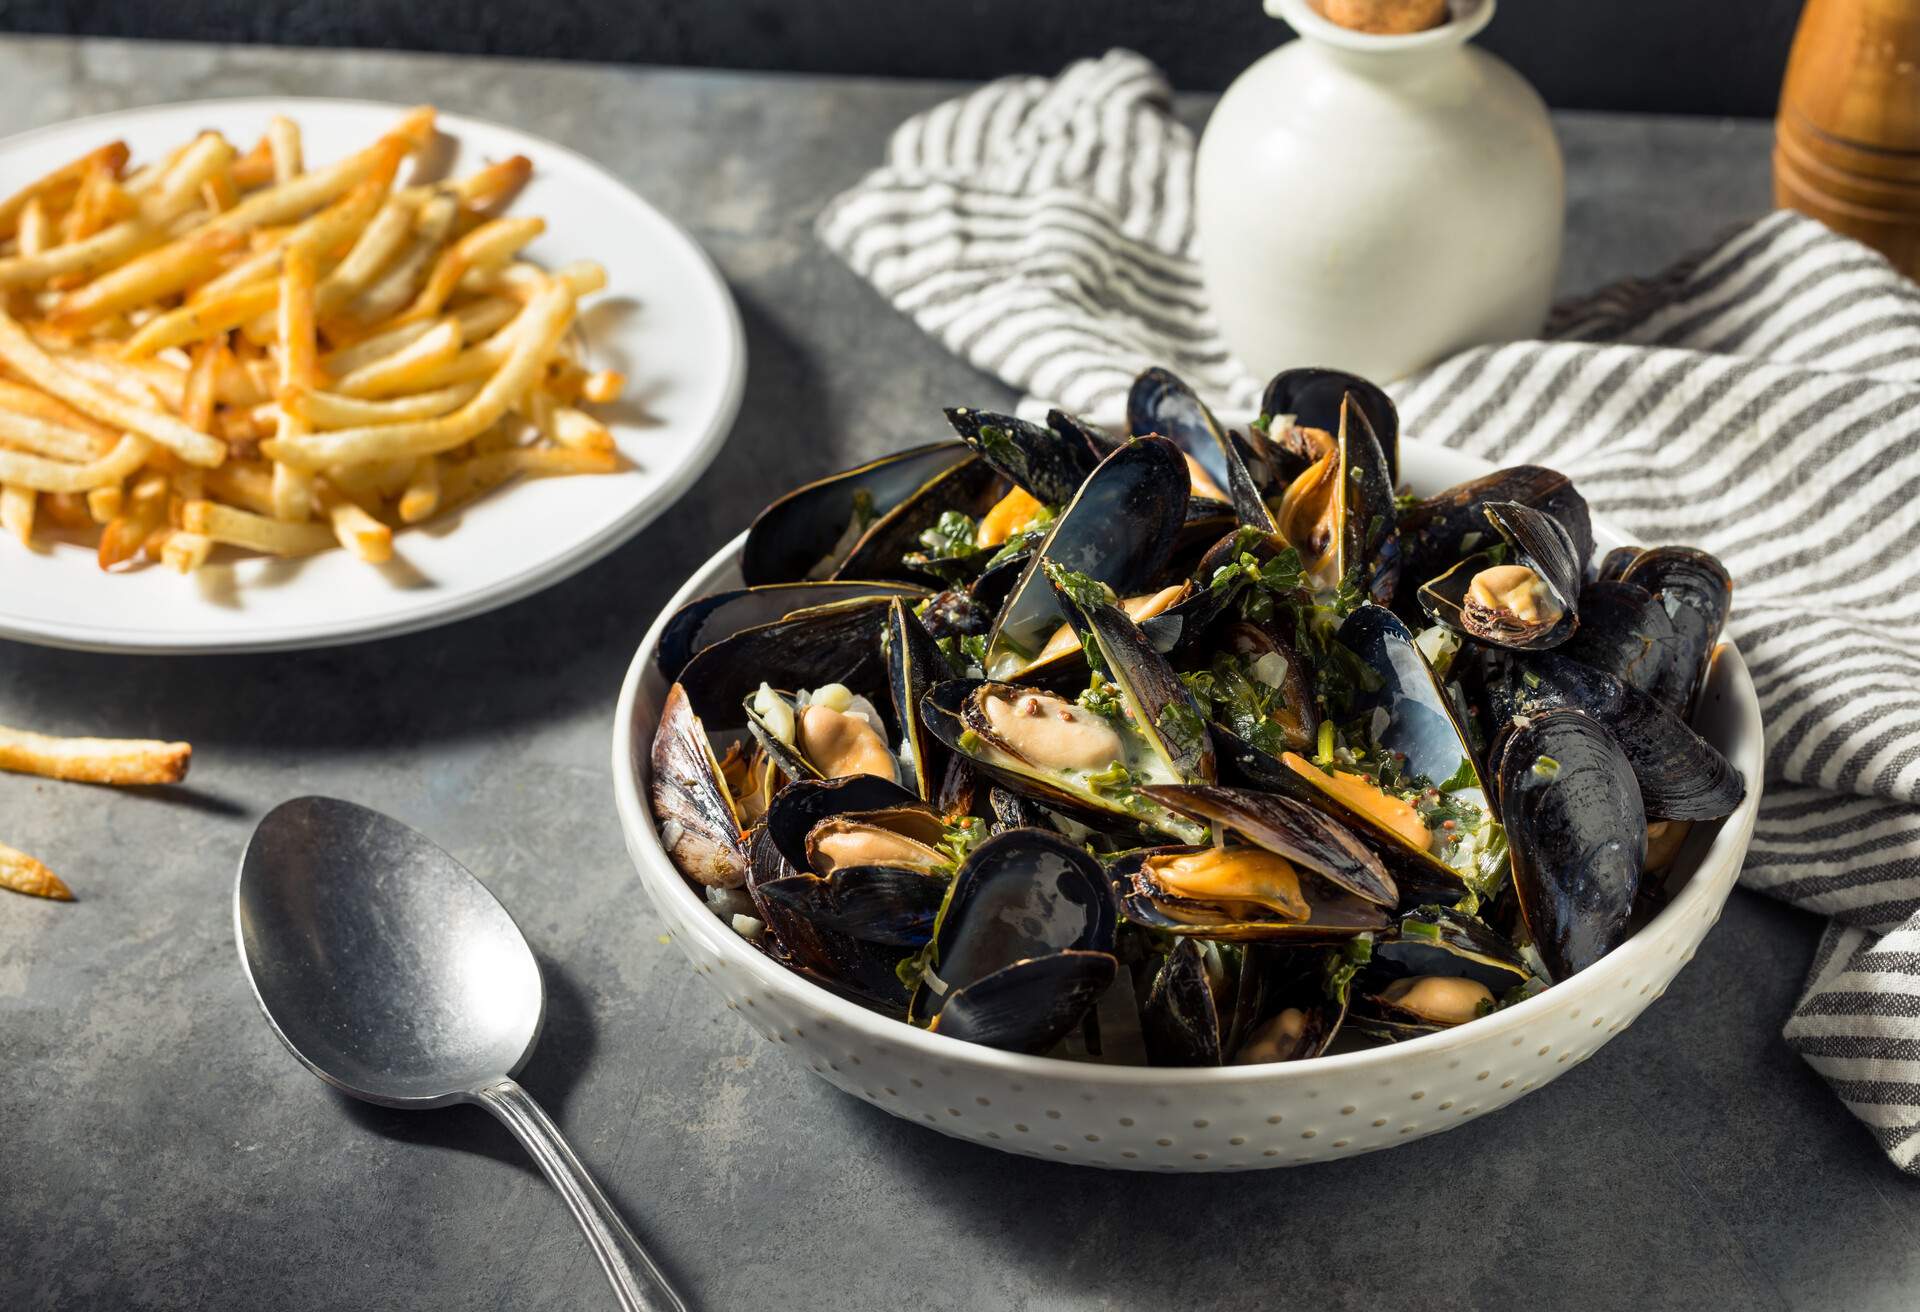 Homemade Moules Frites Mussels and Fries with a White Wine Sauce